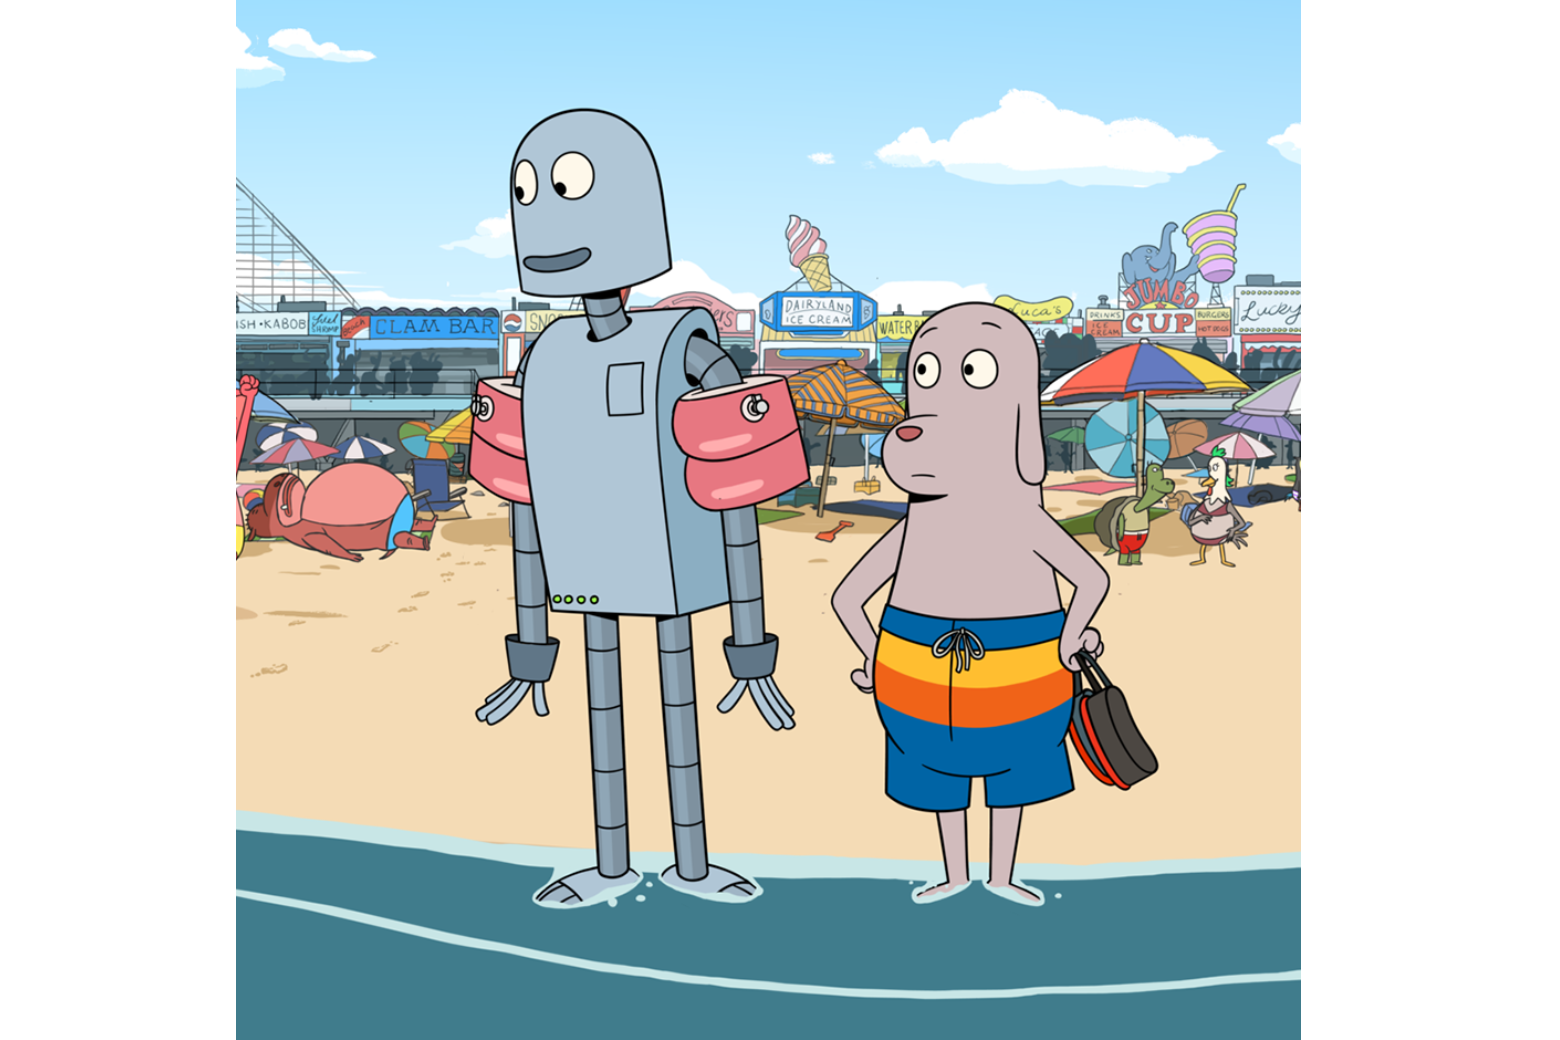 A robot and a dog animation standing on a beach scene